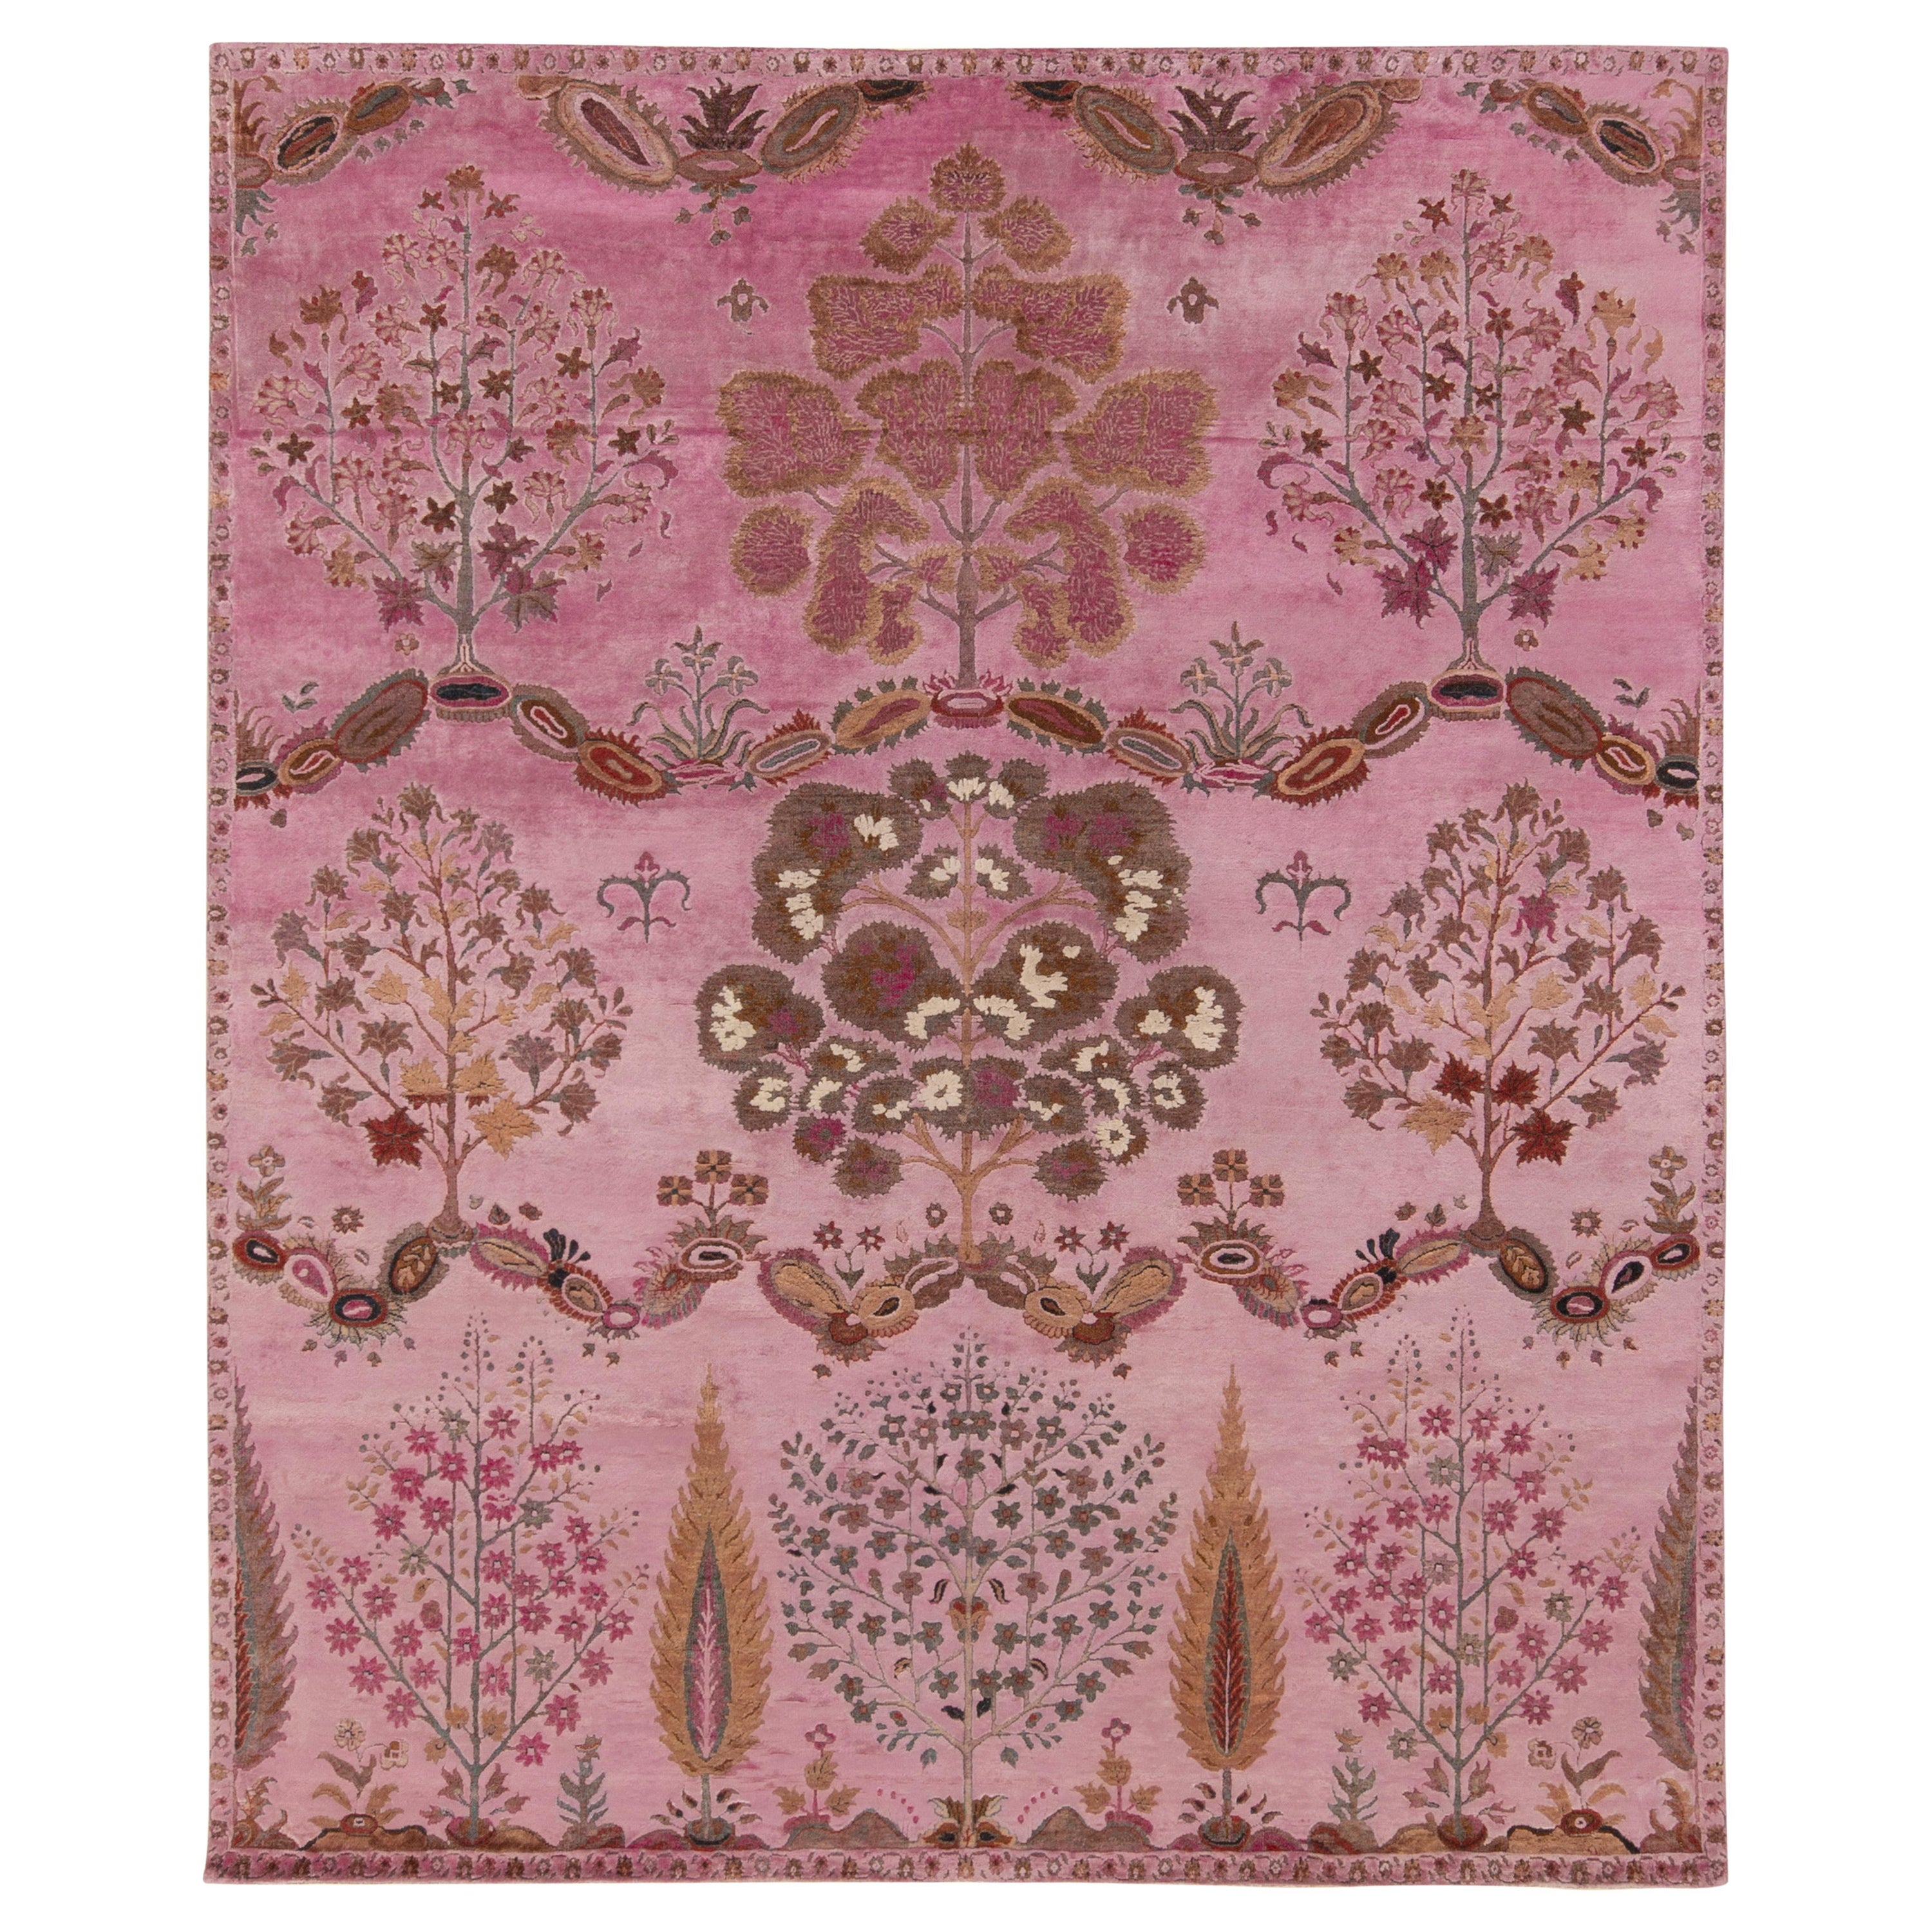 Rug & Kilim’s Classic Style Rug in Pink & Beige-Brown Floral Pattern For Sale